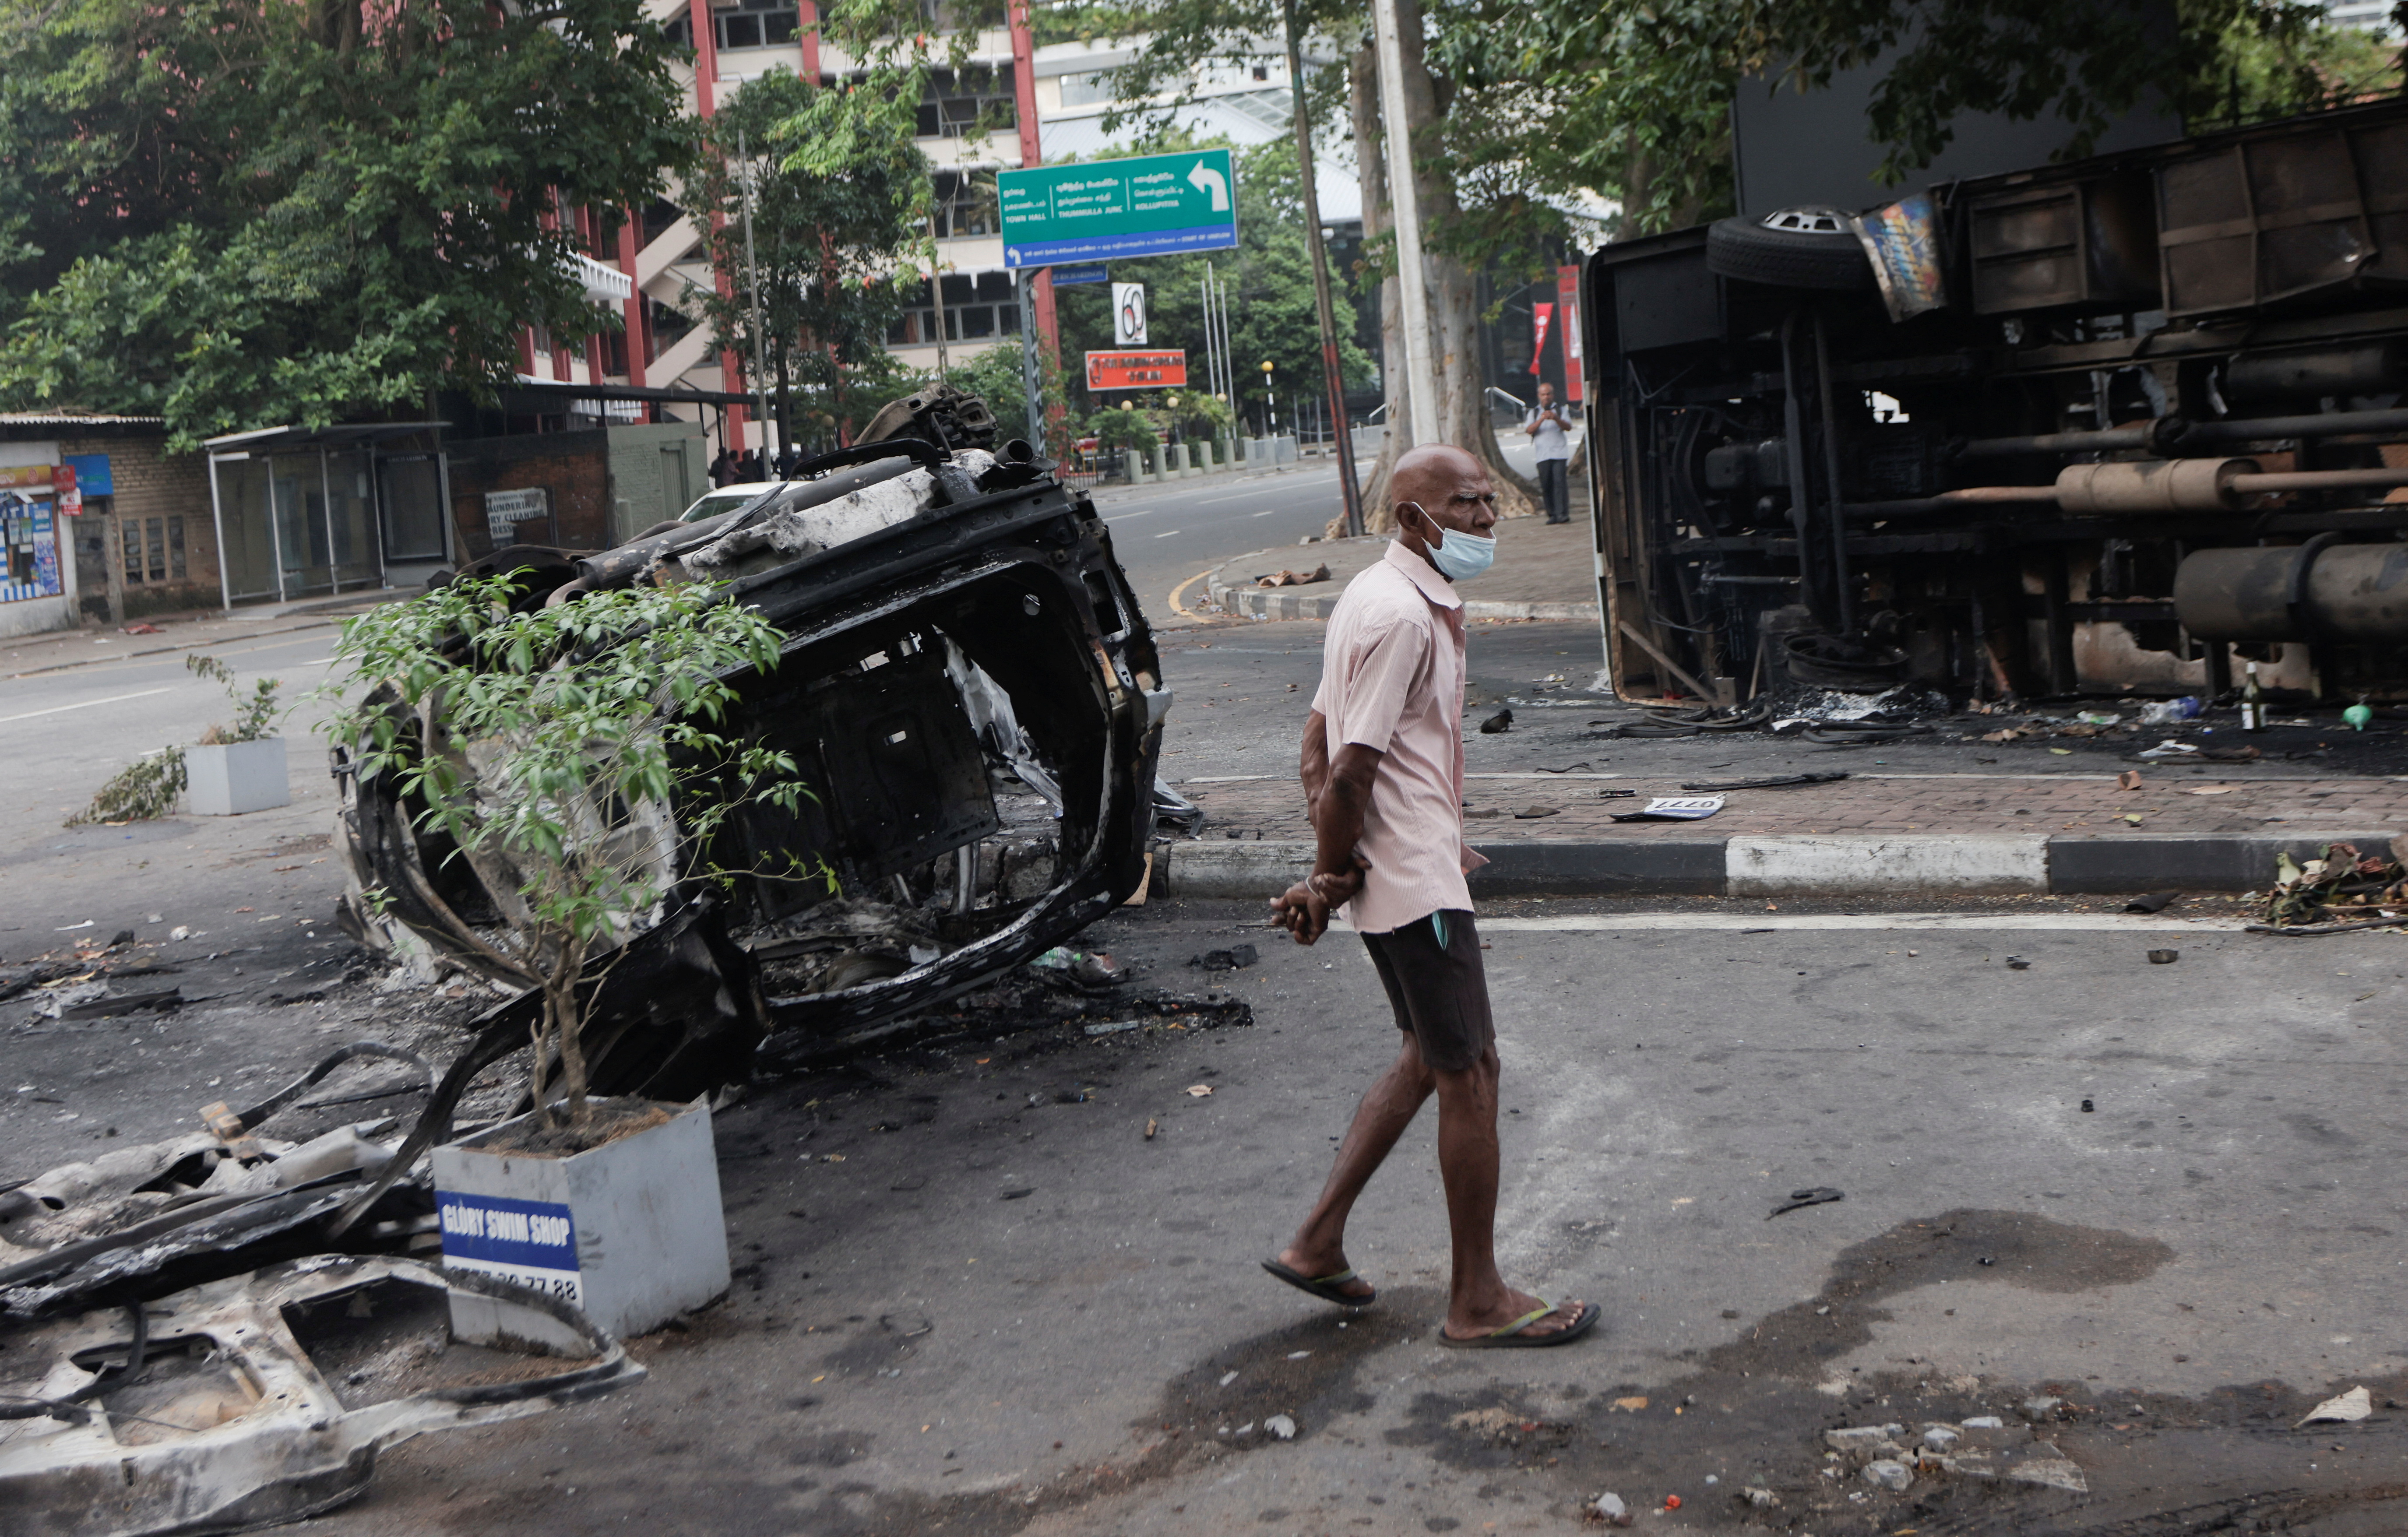 Sri Lanka's ruling party supporters storm anti-government protest camp in Colombo